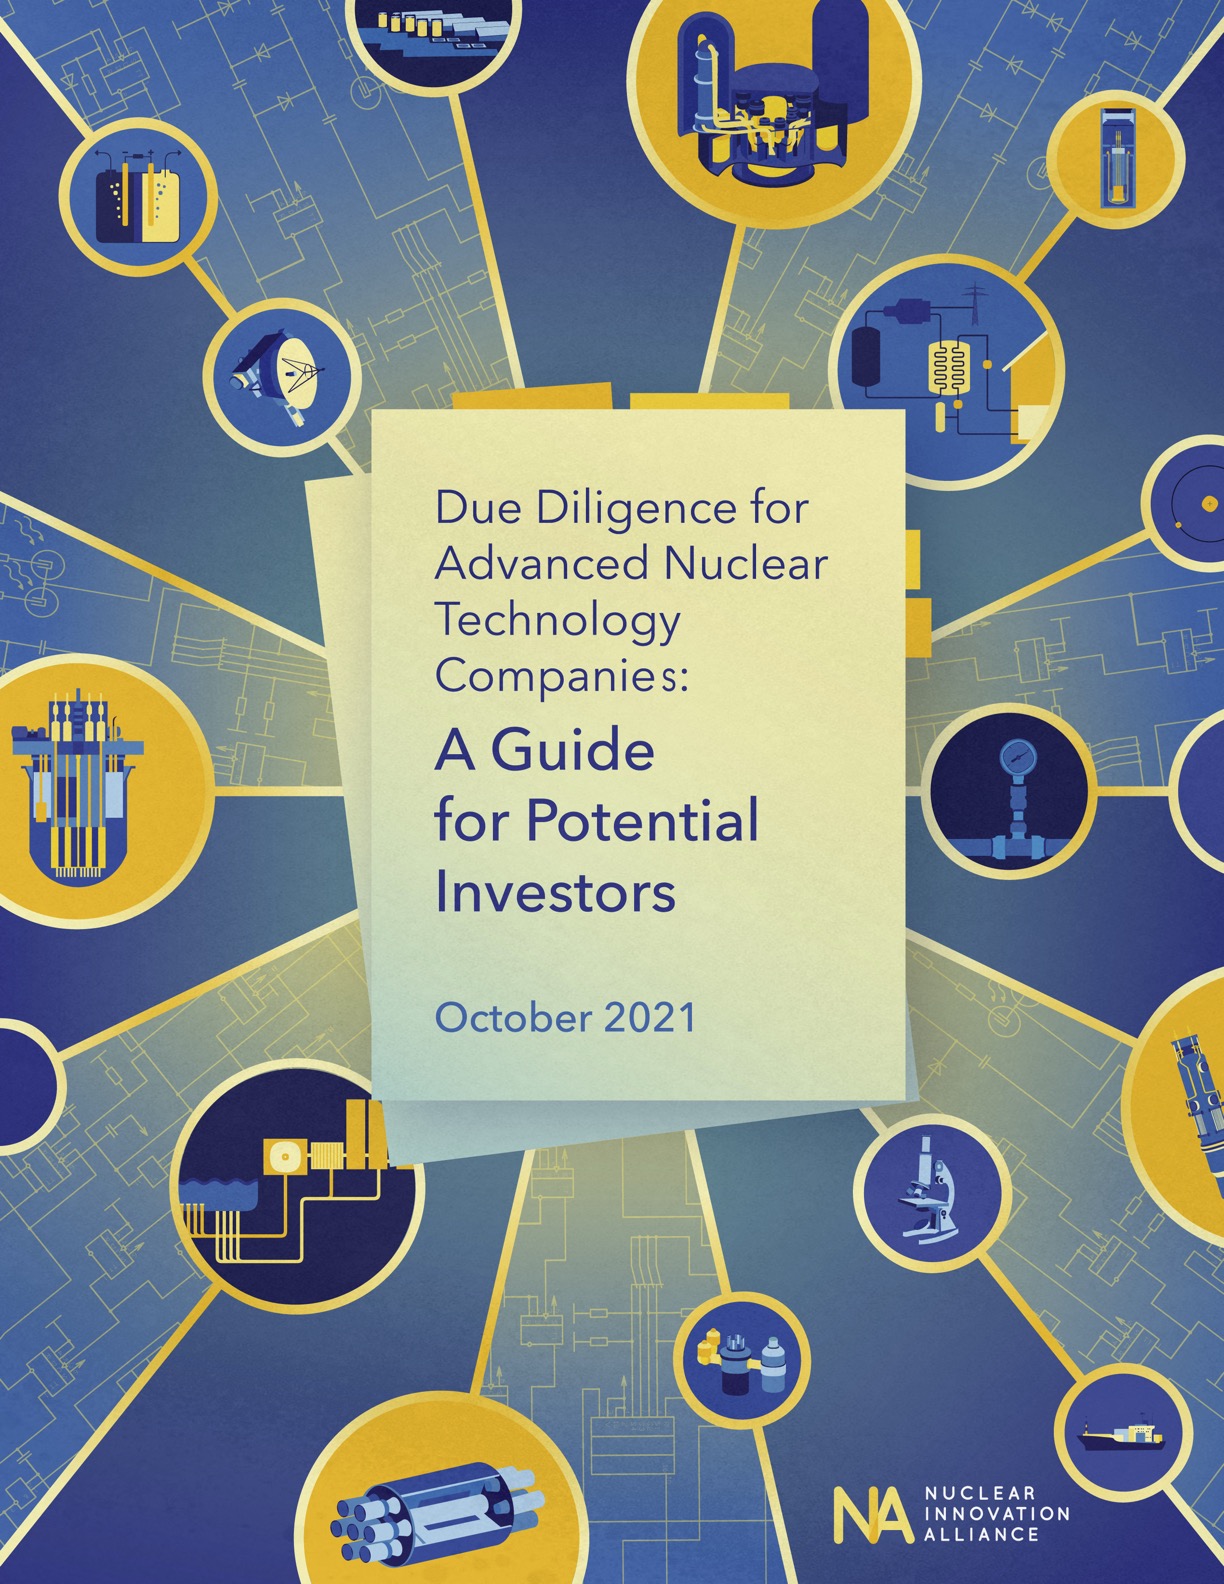 Due Diligence for Advanced Nuclear Technology Companies: A Guide for Potential Investors